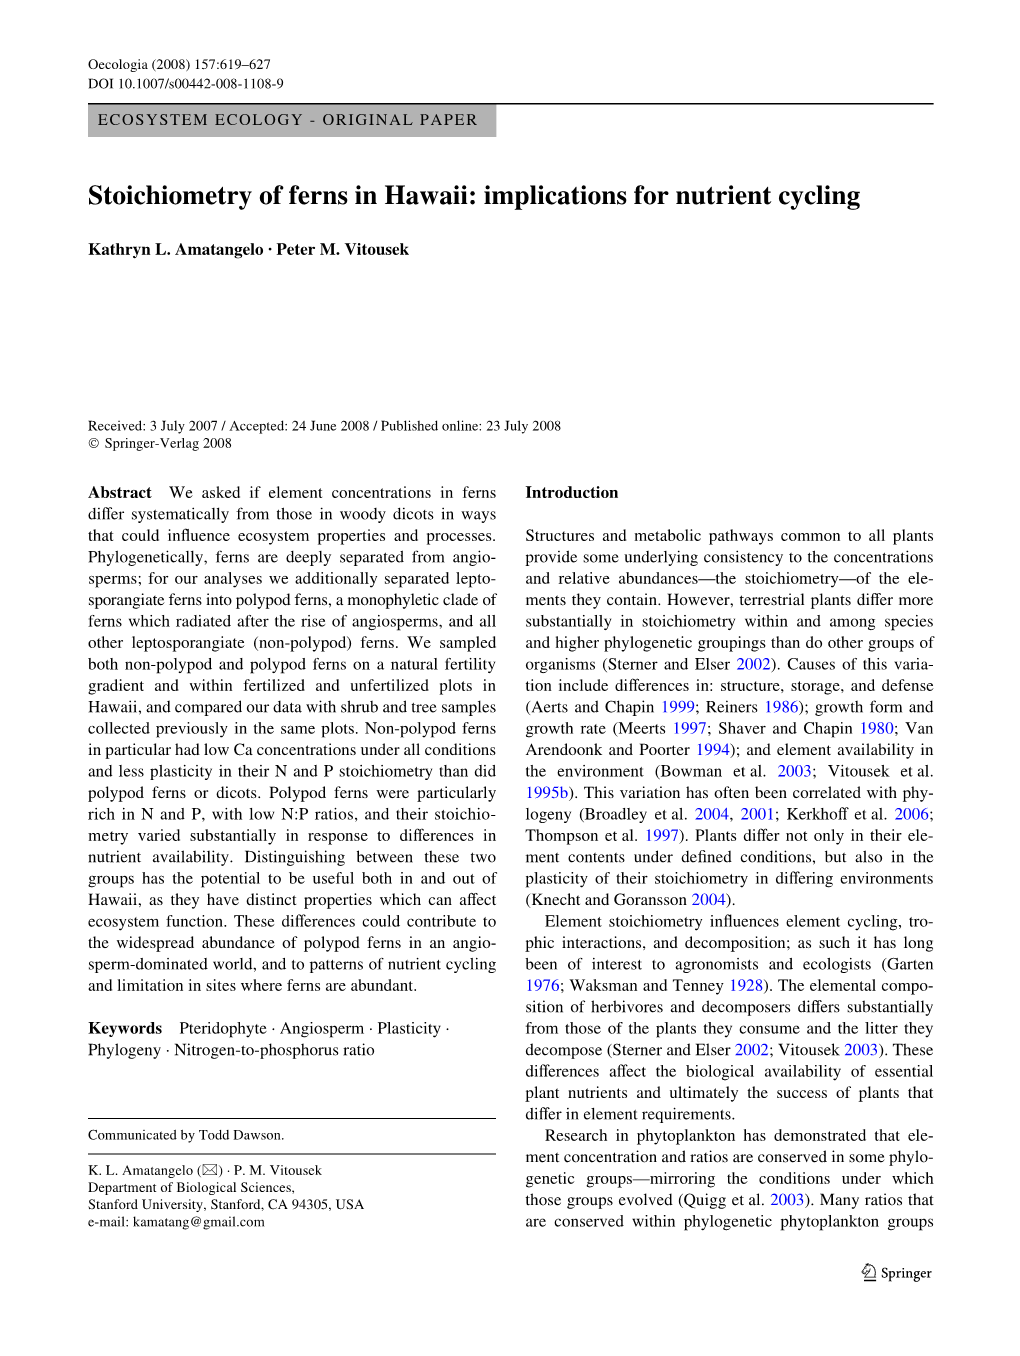 Stoichiometry of Ferns in Hawaii: Implications for Nutrient Cycling